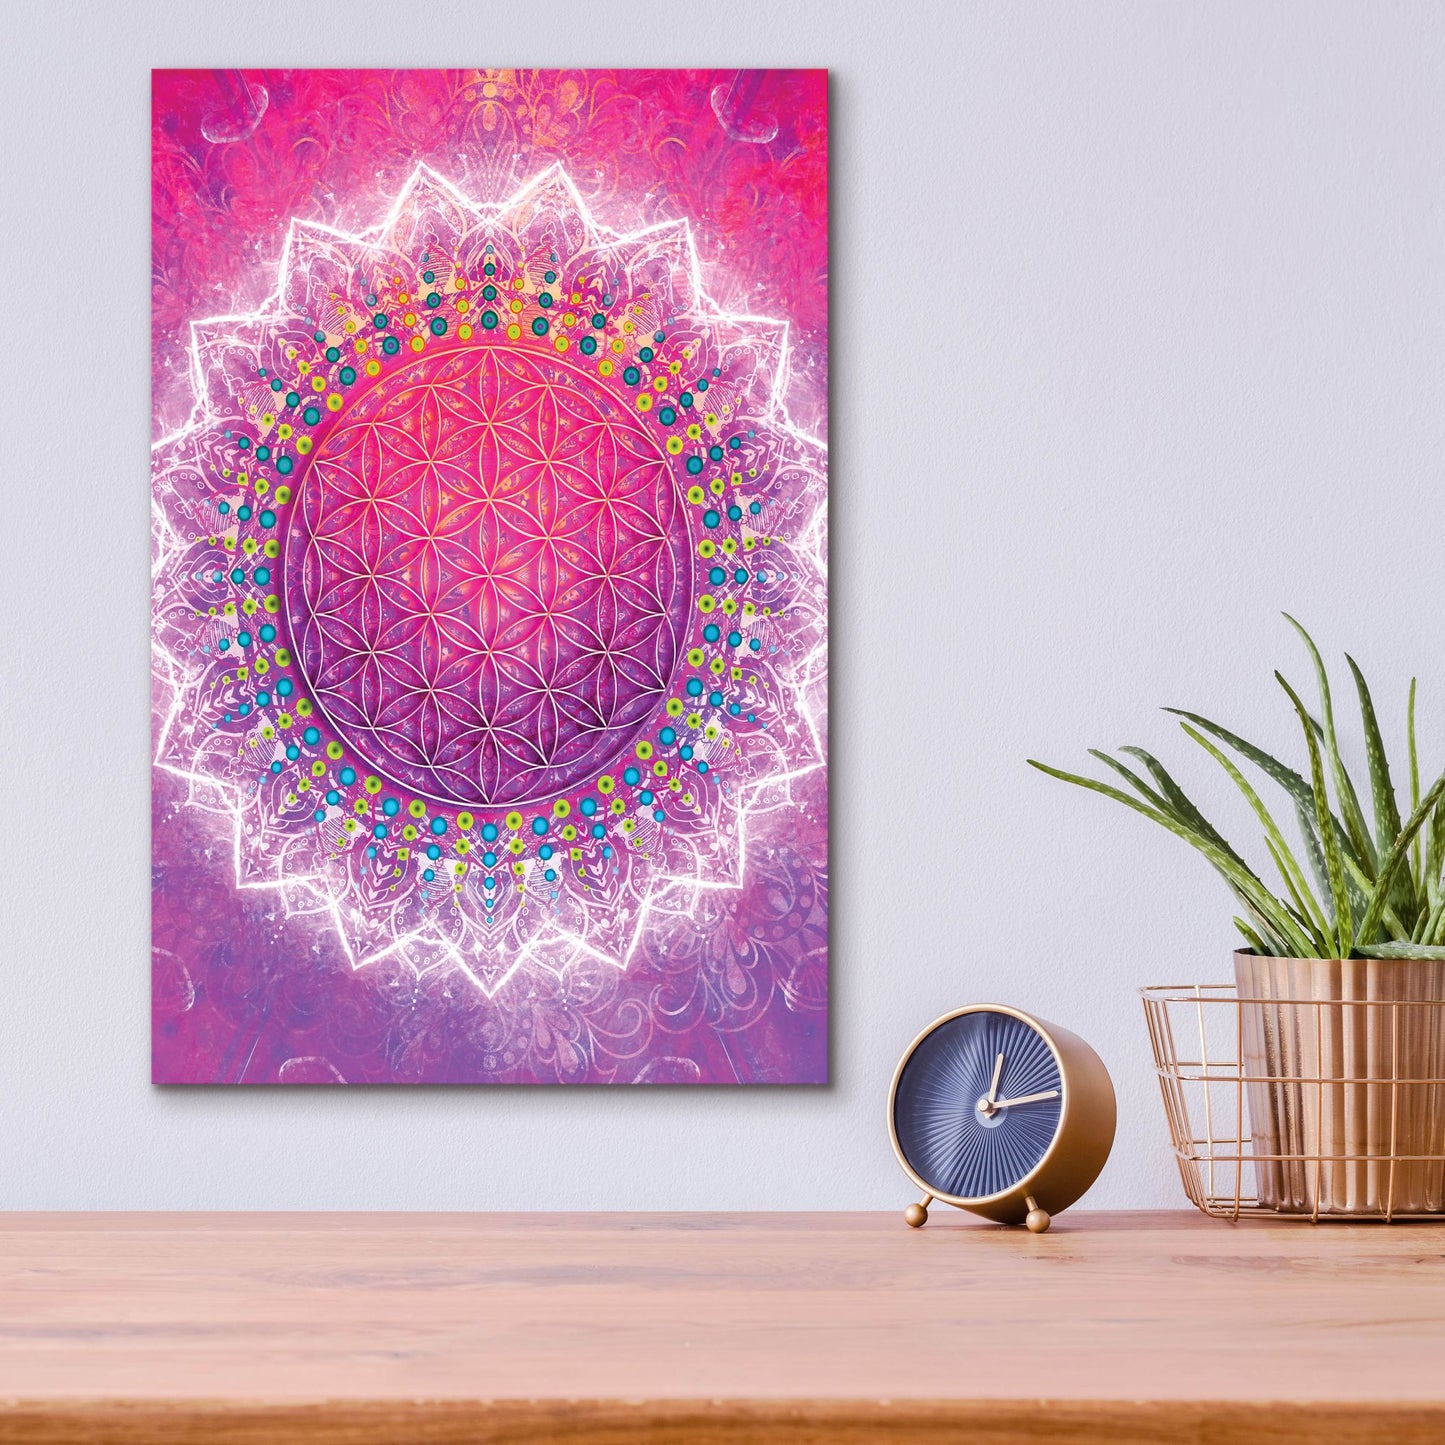 Epic Art 'Flower Of Life' by Cameron Gray, Acrylic Glass Wall Art,12x16